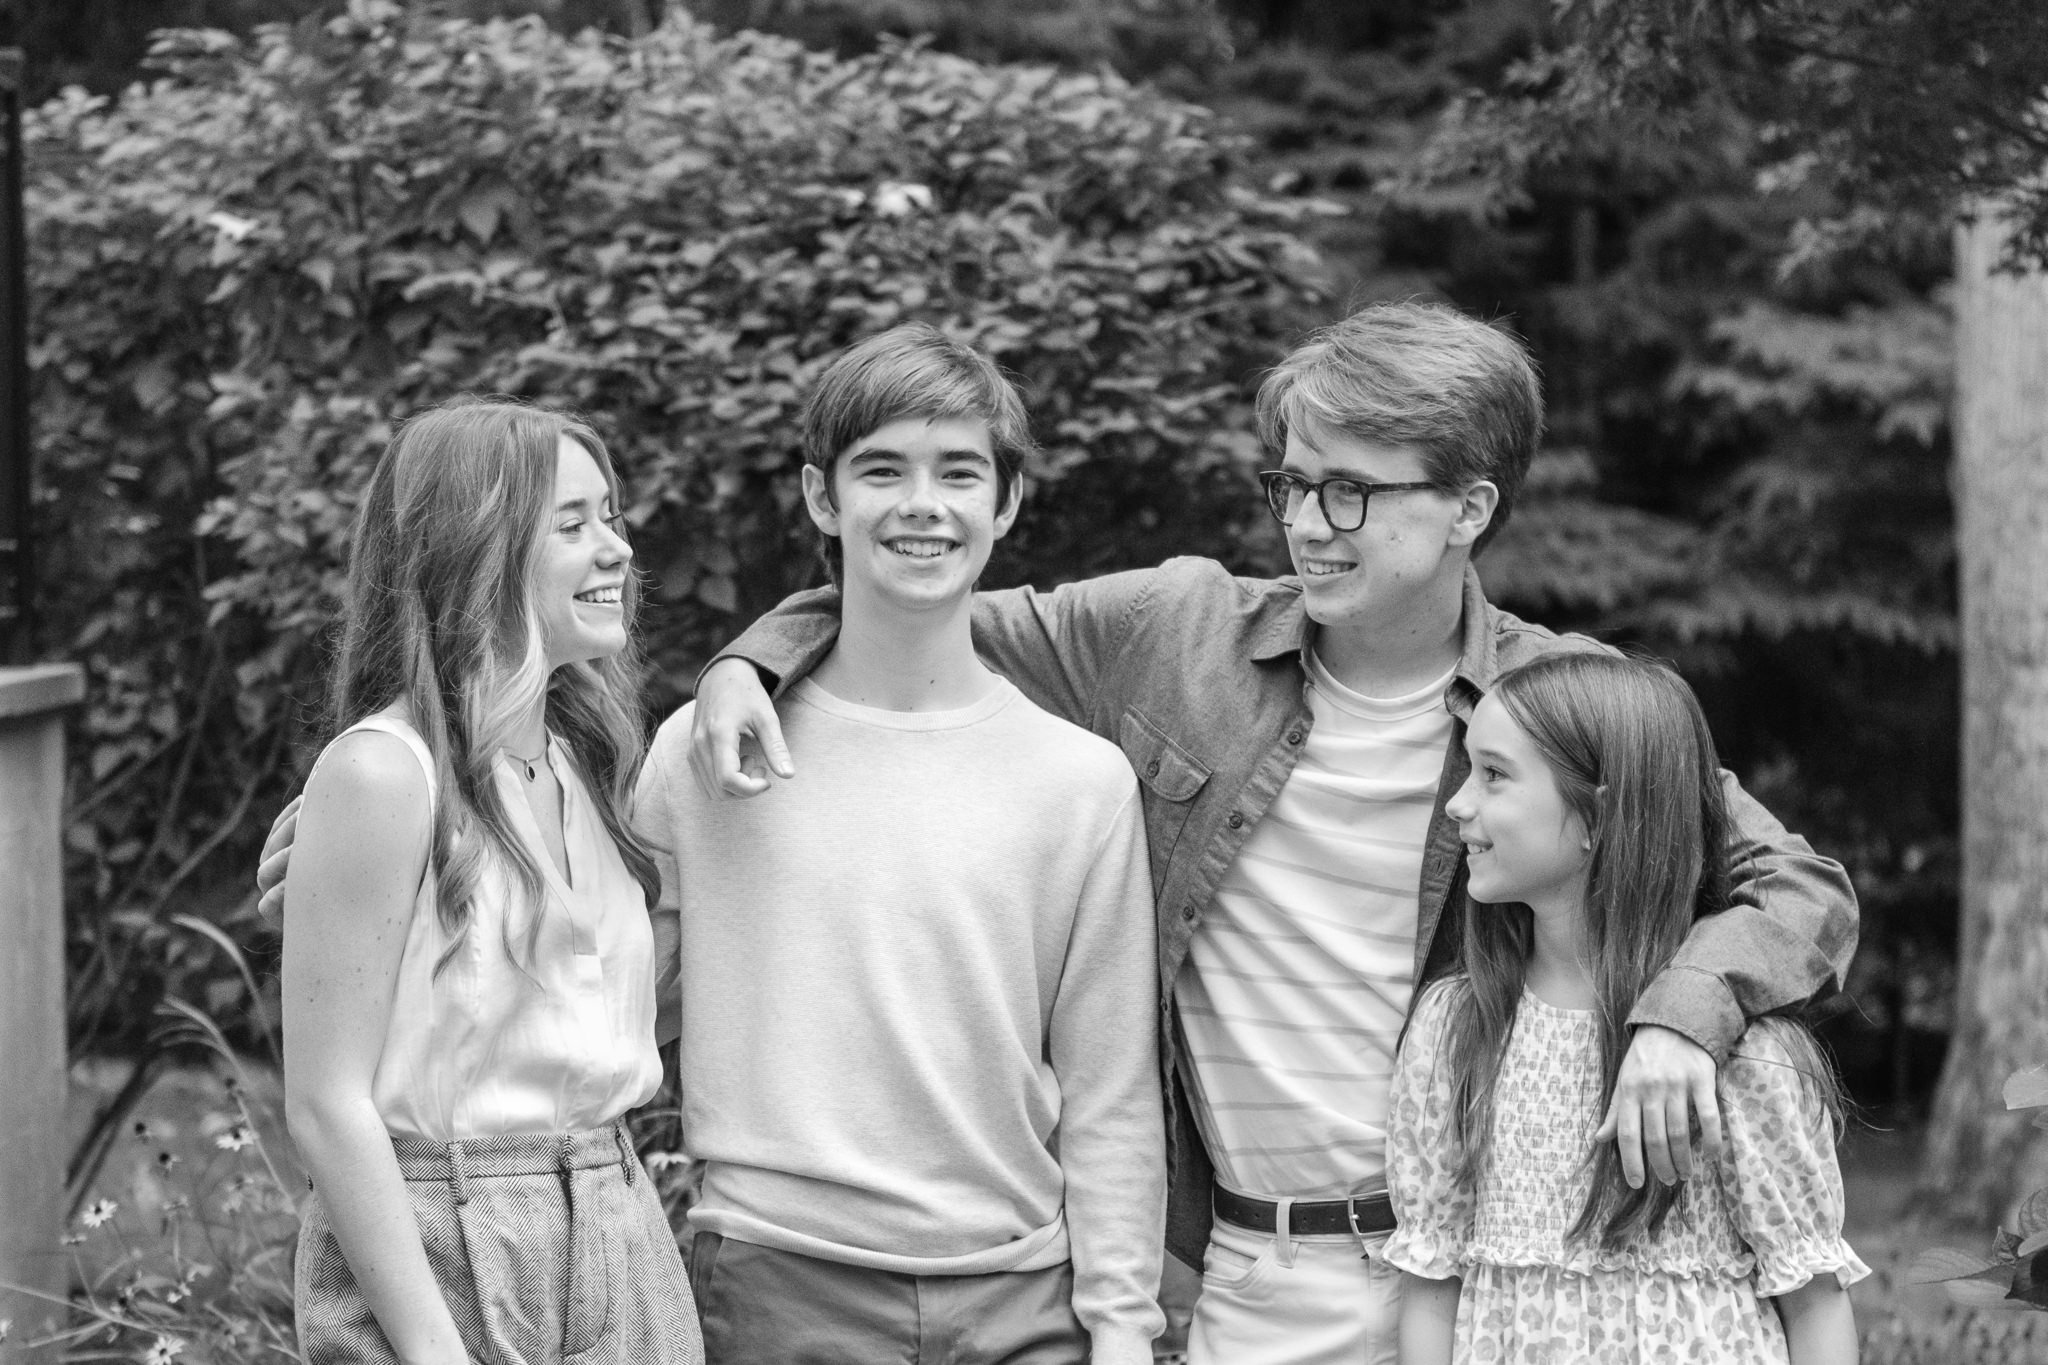  Professional family photographer Nicole Hawkins Photography captures a candid black-and-white portrait of two sisters and two brothers. #NicoleHawkinsPhotography #NicoleHawkinsFamilyPortrait #NicoleHawkinsSenior #NJPortraits #siblingportrait 